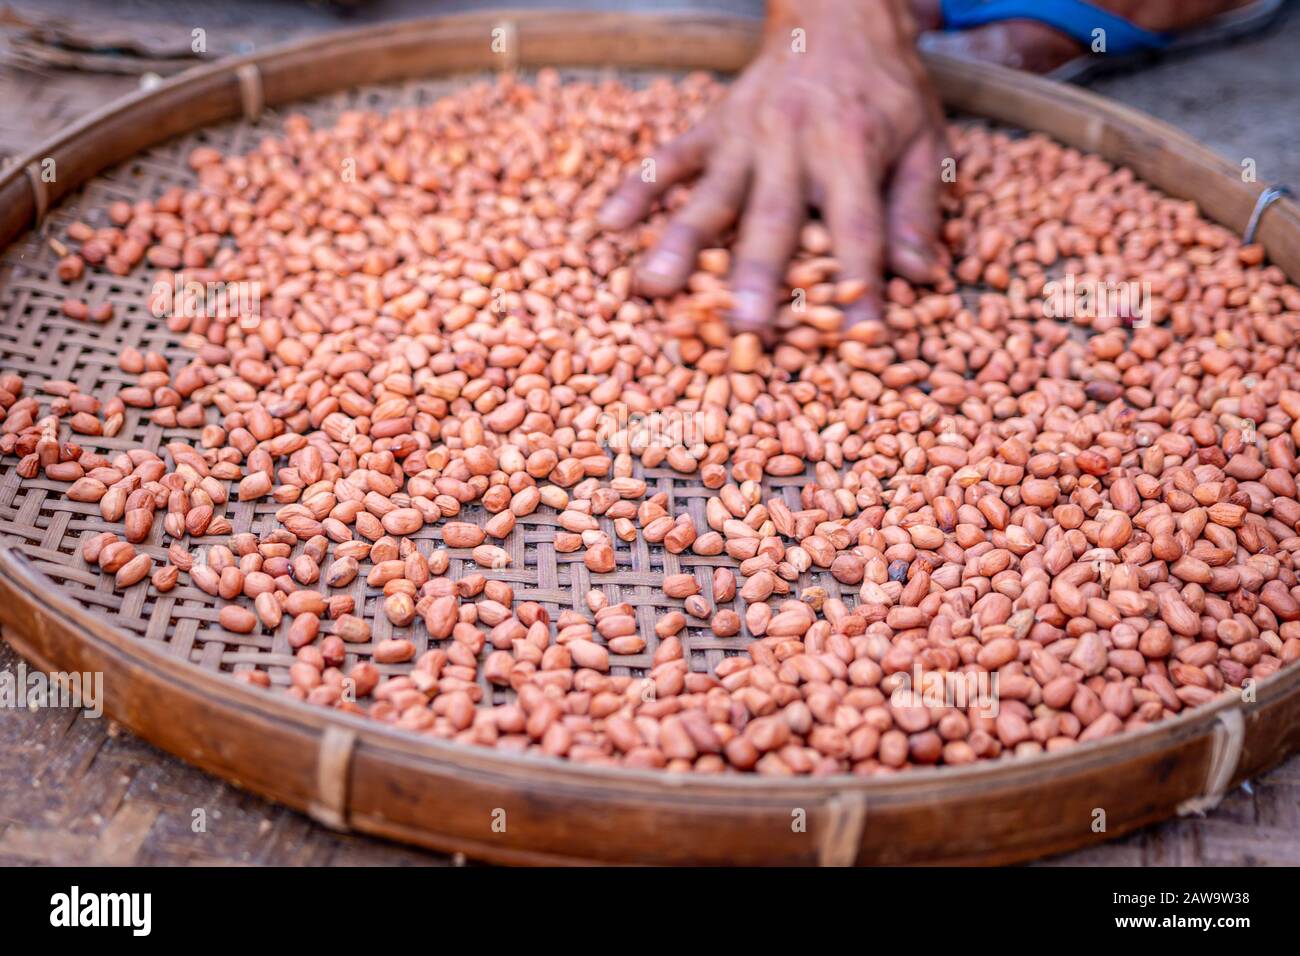 Hands on shelled peanuts in a threshing basket, local market Stock Photo